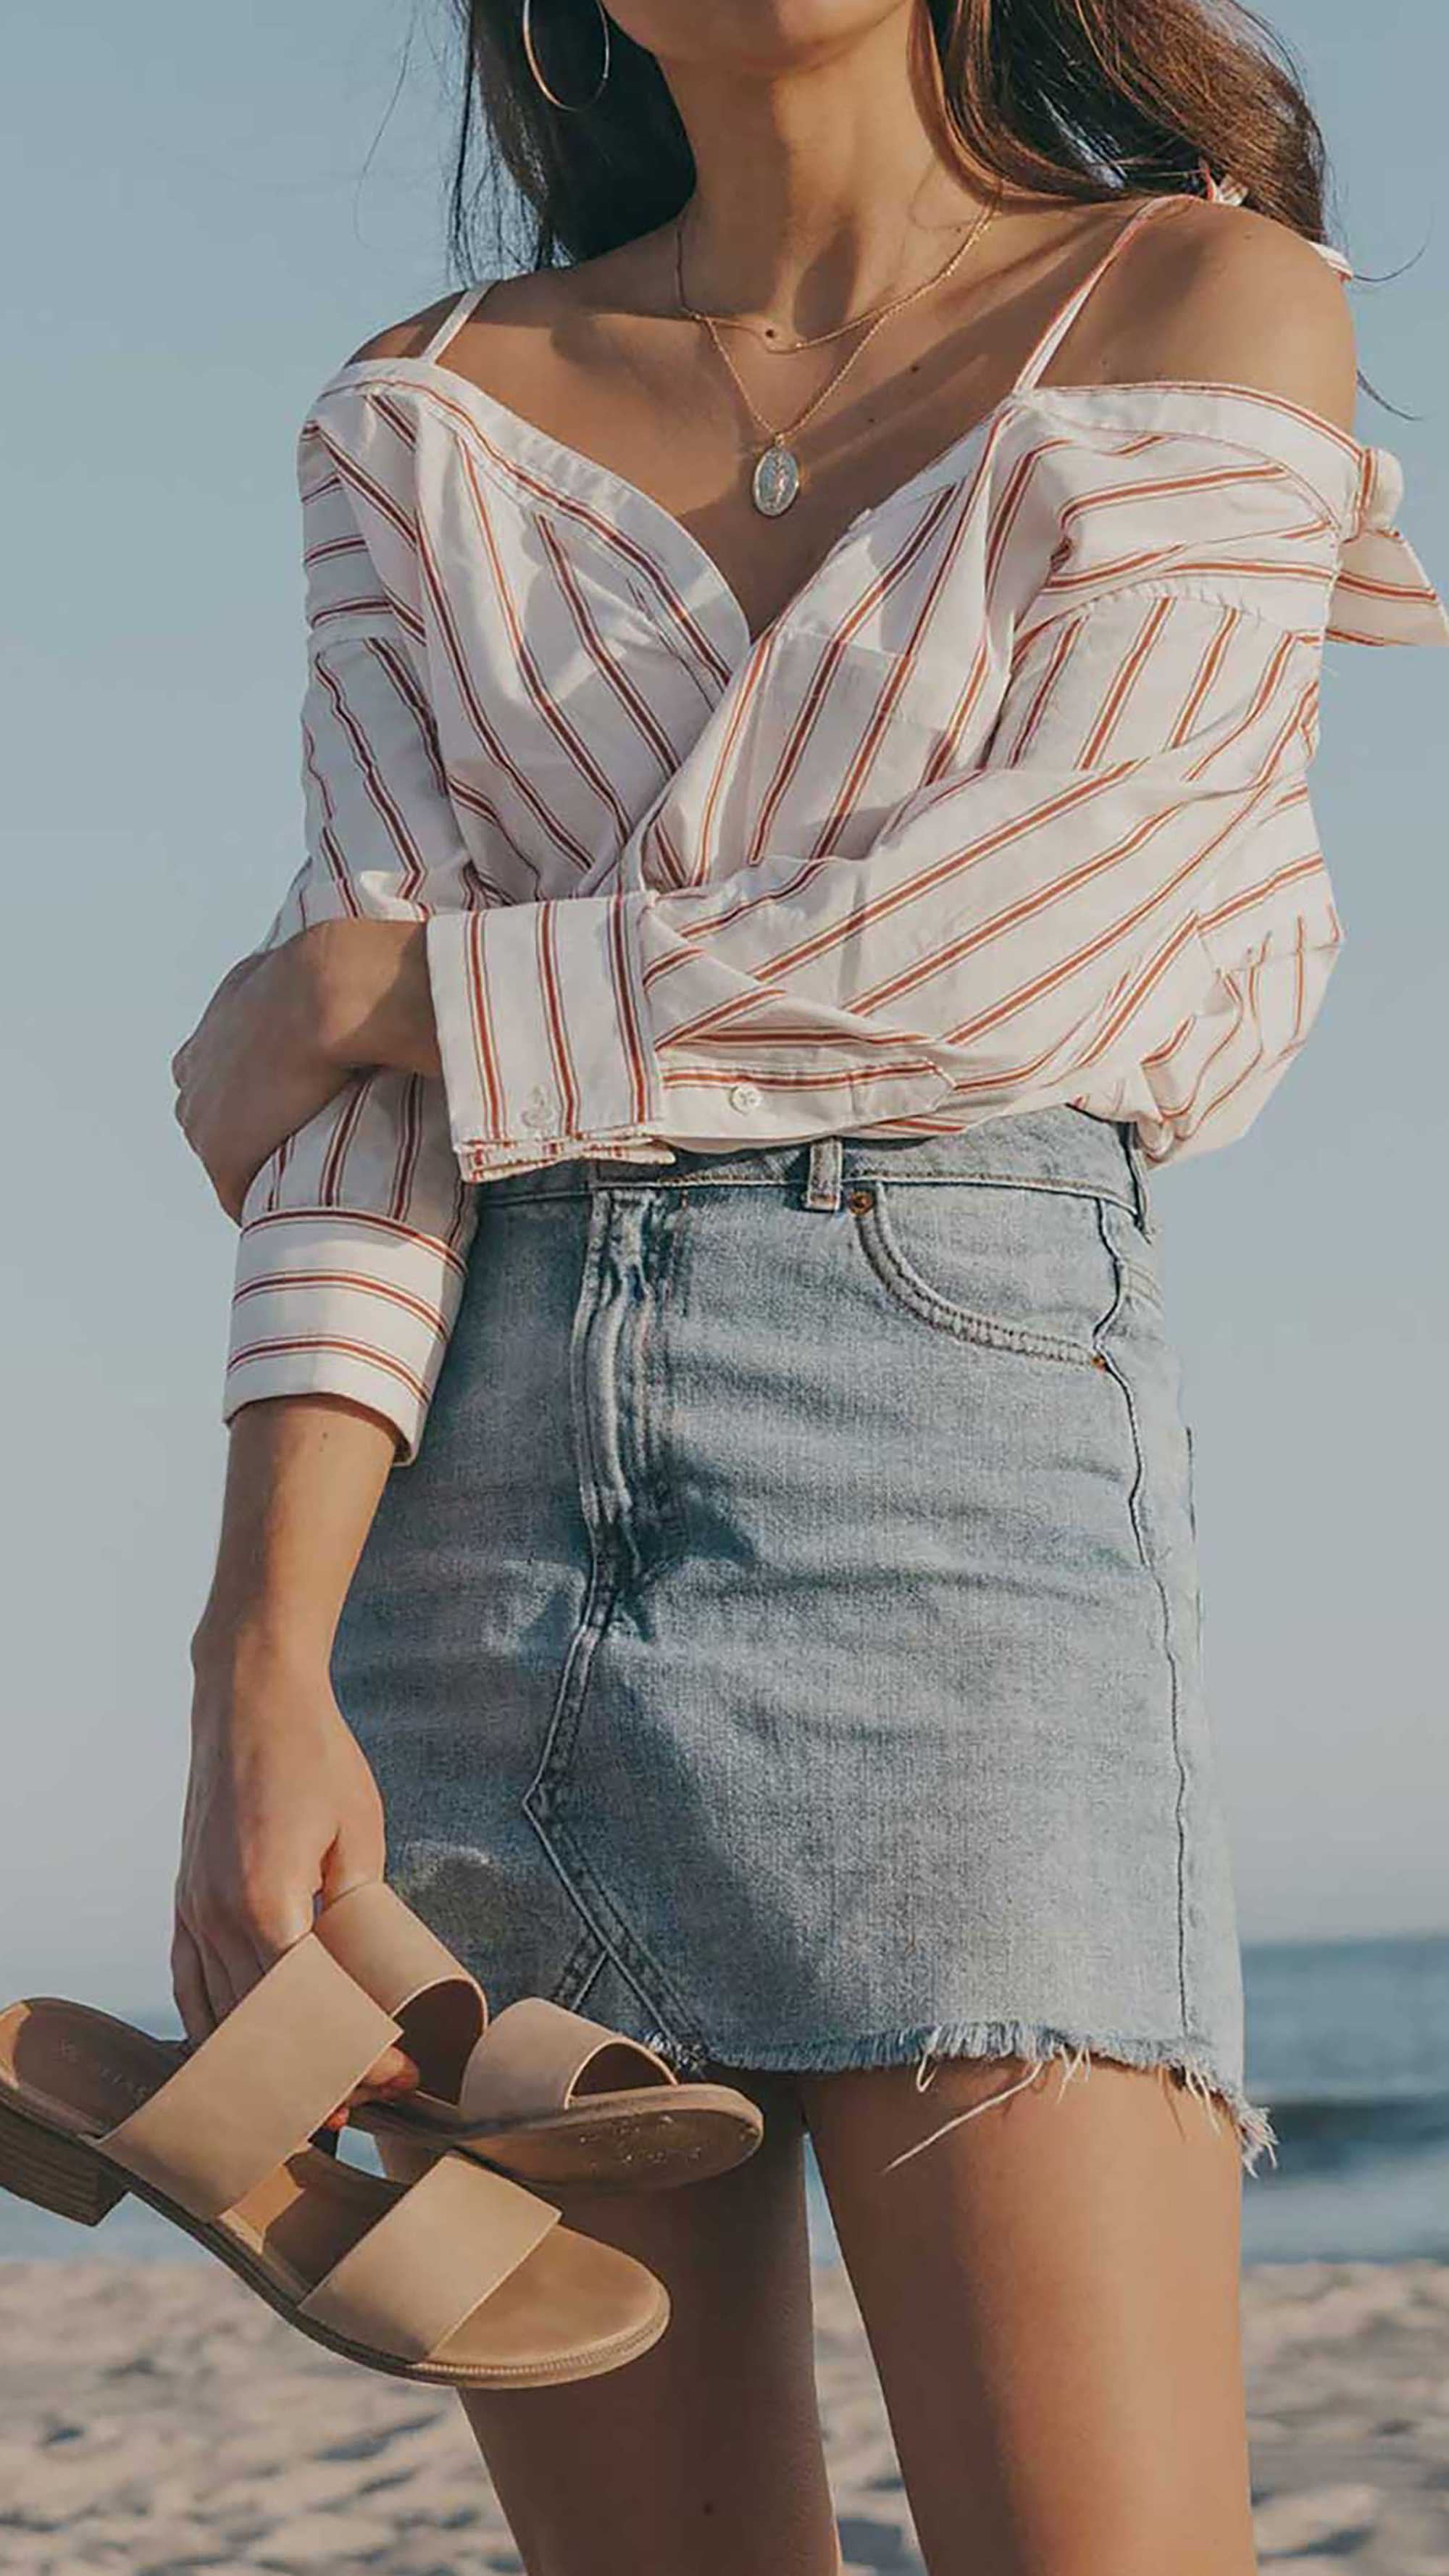 Easy-Summer-Outfit-Idea.-Sarah-Butler-of-@sarahchristine-wearing-Off-the-Shoulder-Stripe-Button-up-Shirt-and-Denim-Mini-Skirt-in-Newport-Beach,-California.-summer-outfit,-summer-outfit-ideas,-casual-summer-outfits--2.jpg